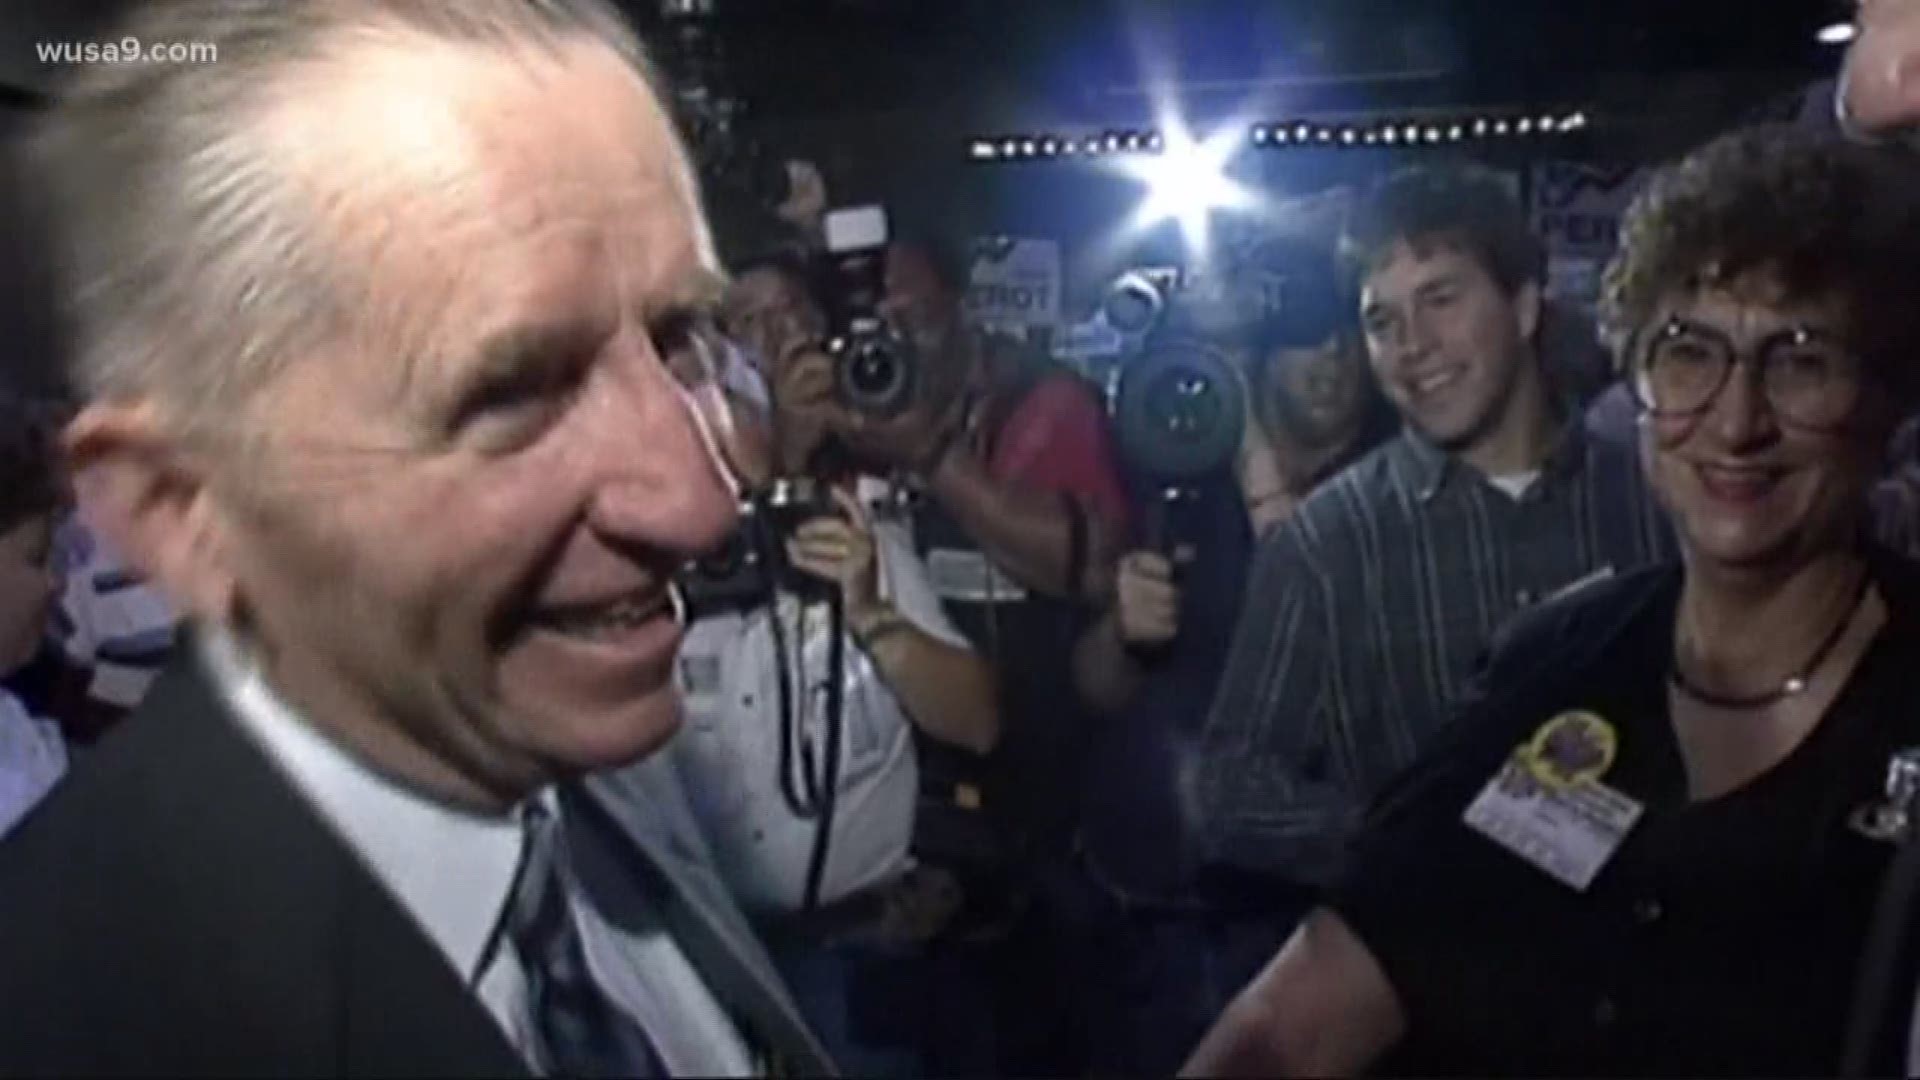 Perot managed to get on the 1992 debate stage in an impressive third-party run.